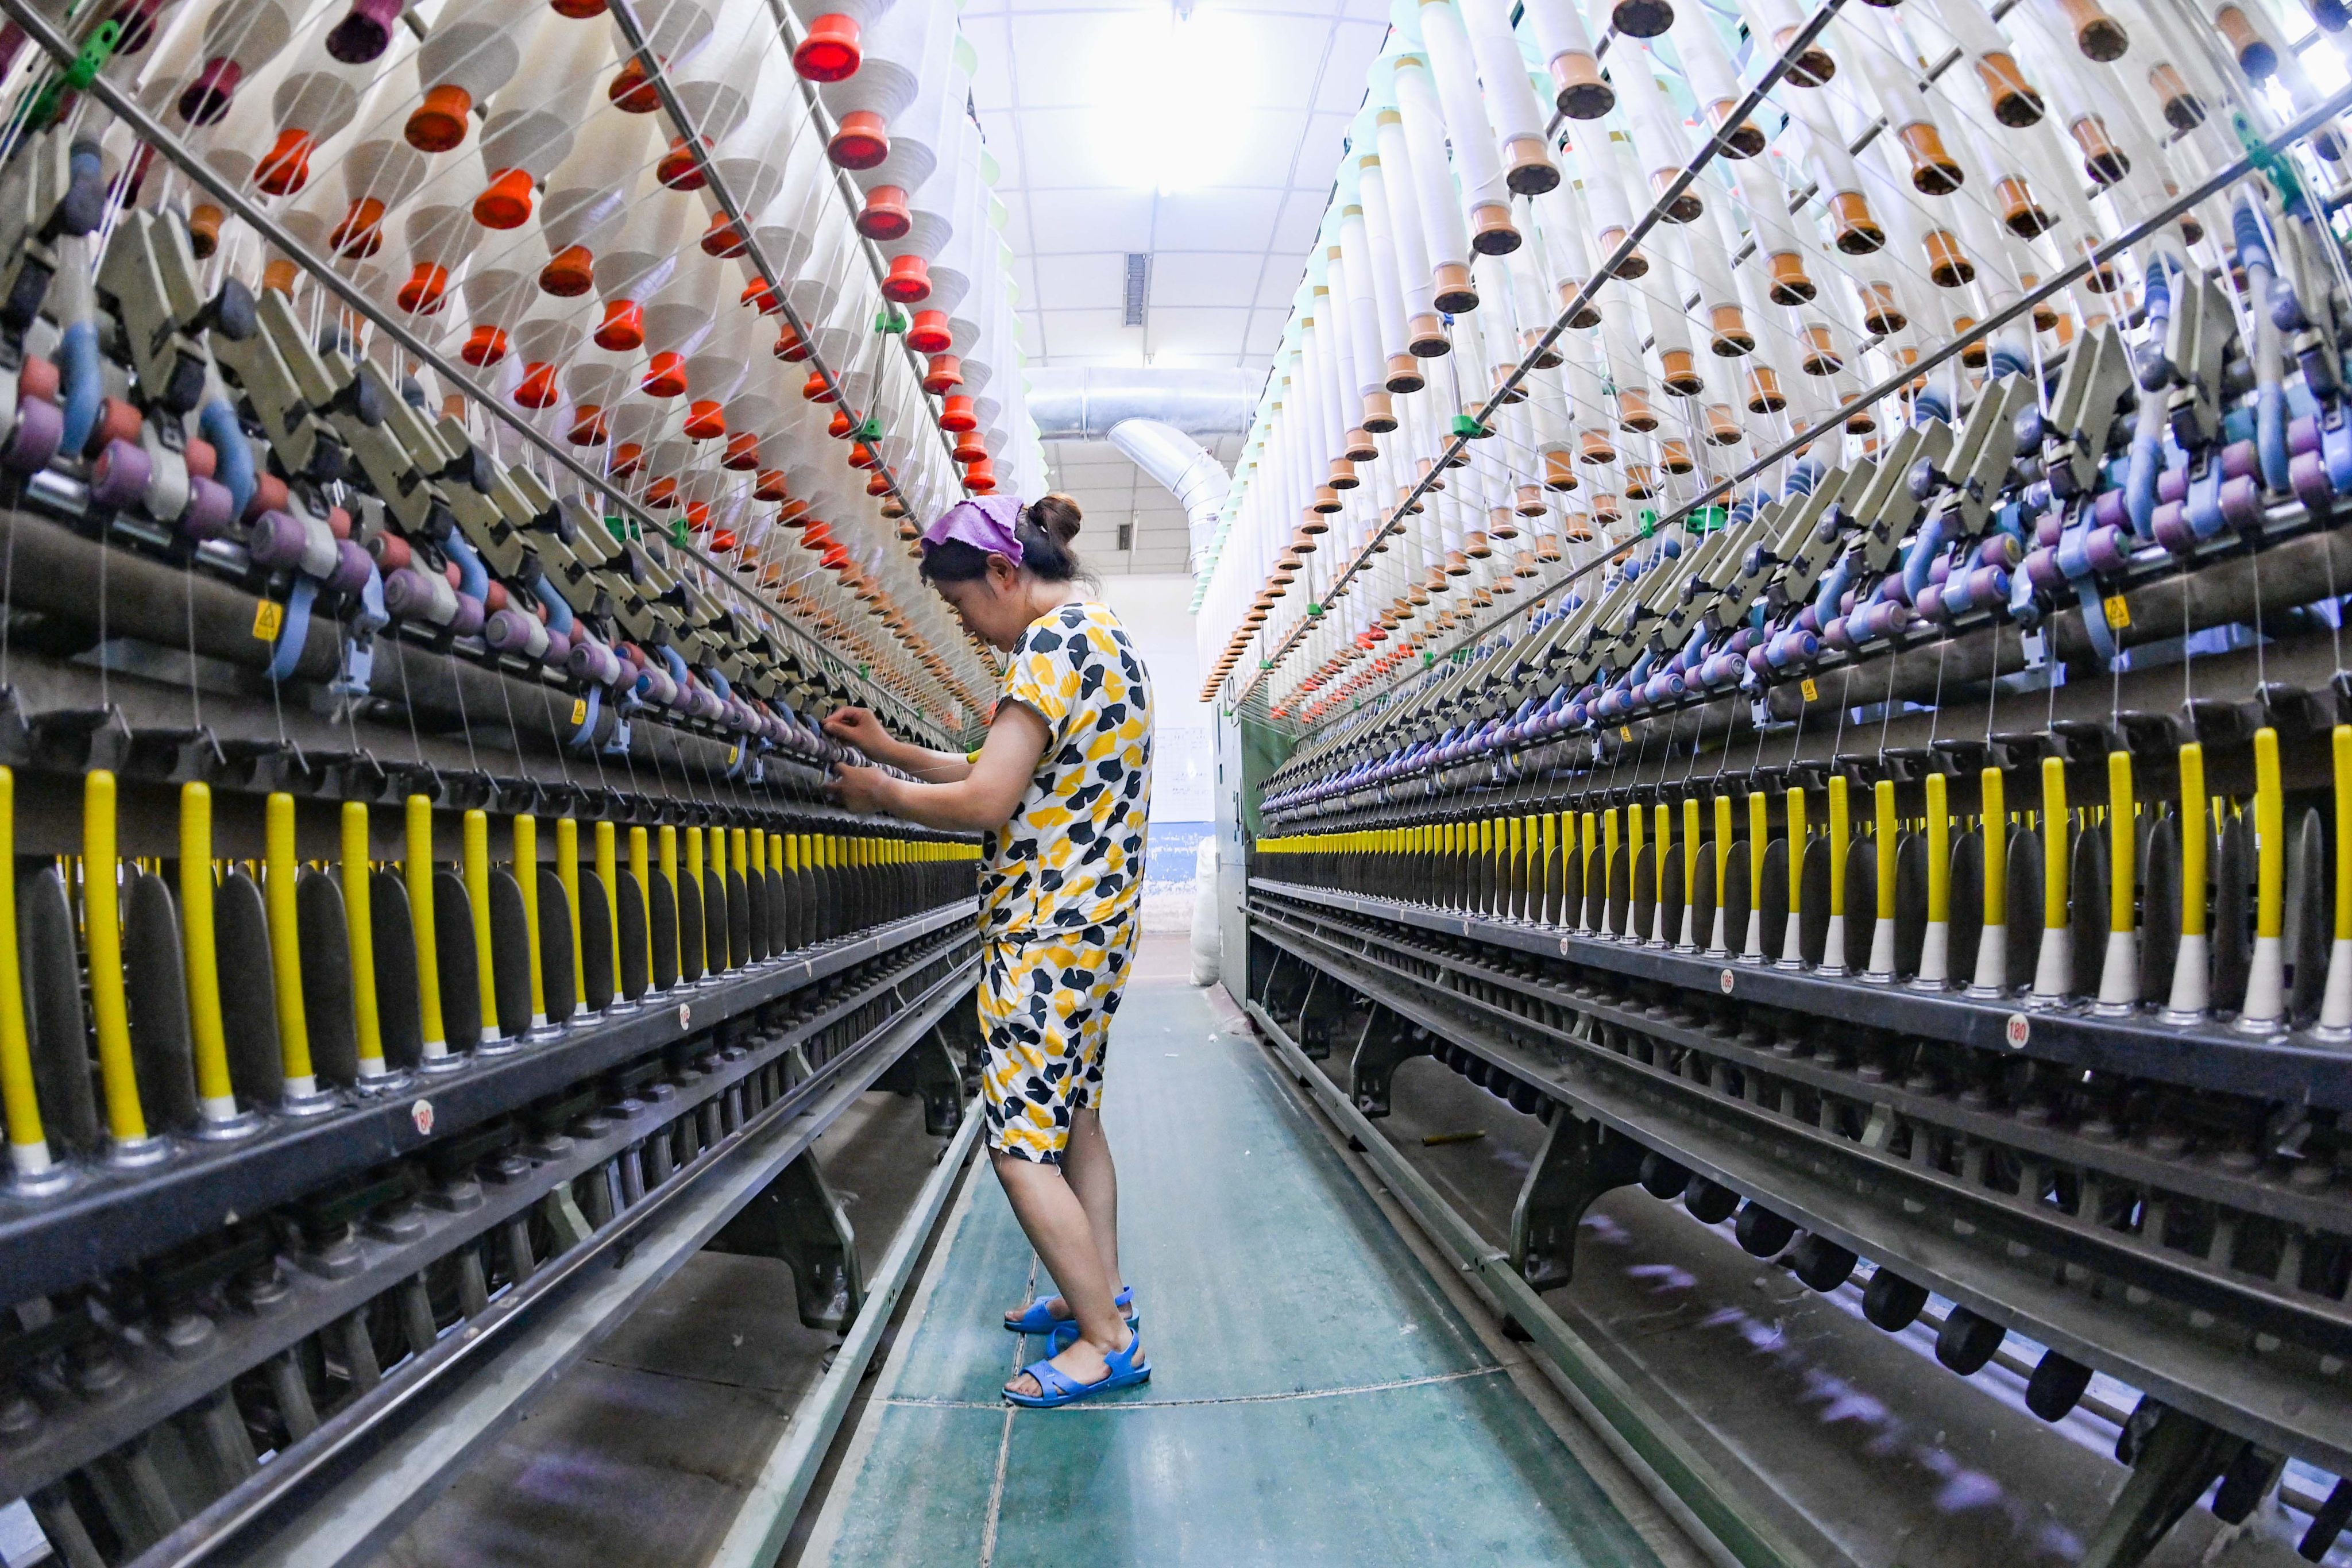 China has several economic-development zones, including in Shandong province where this textile enterprise operates, and they have long served to bolster foreign direct investment in the country. Photo: Getty Images